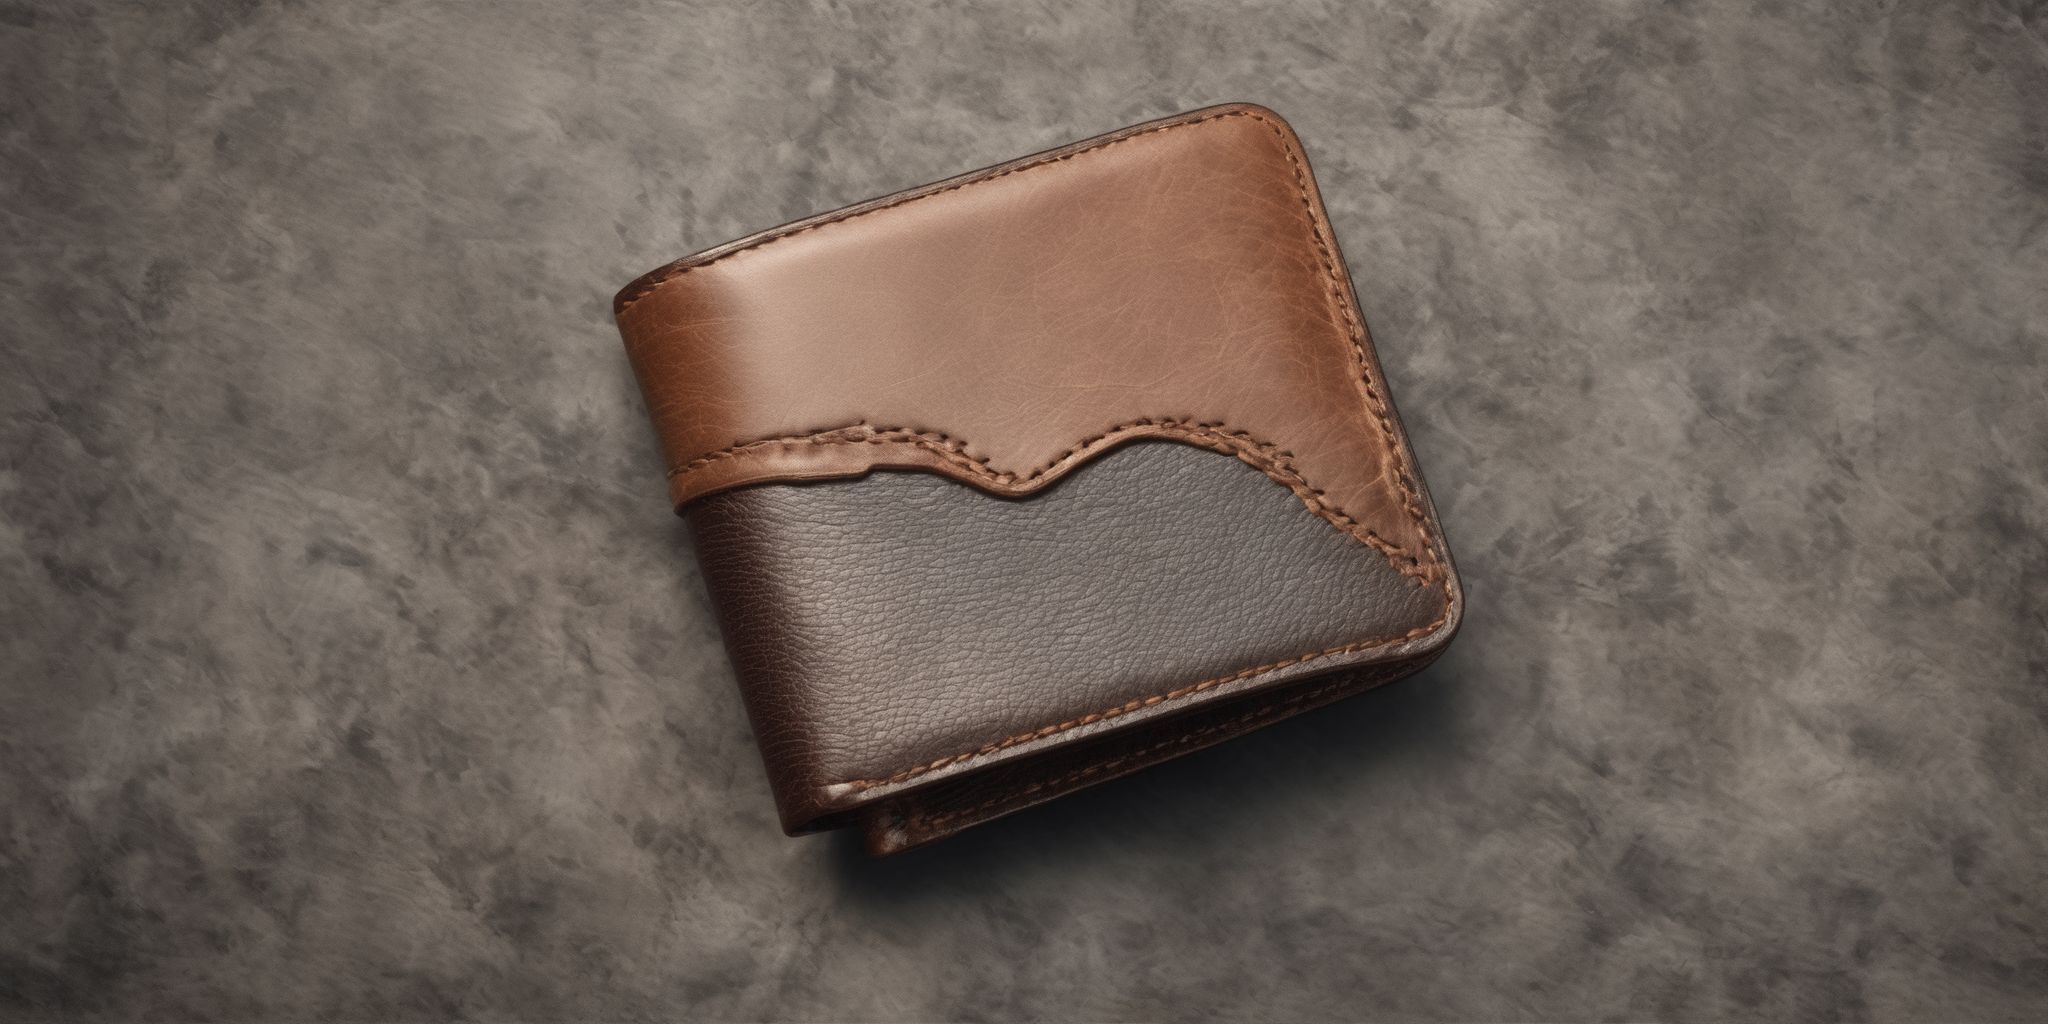 Wallet  in realistic, photographic style